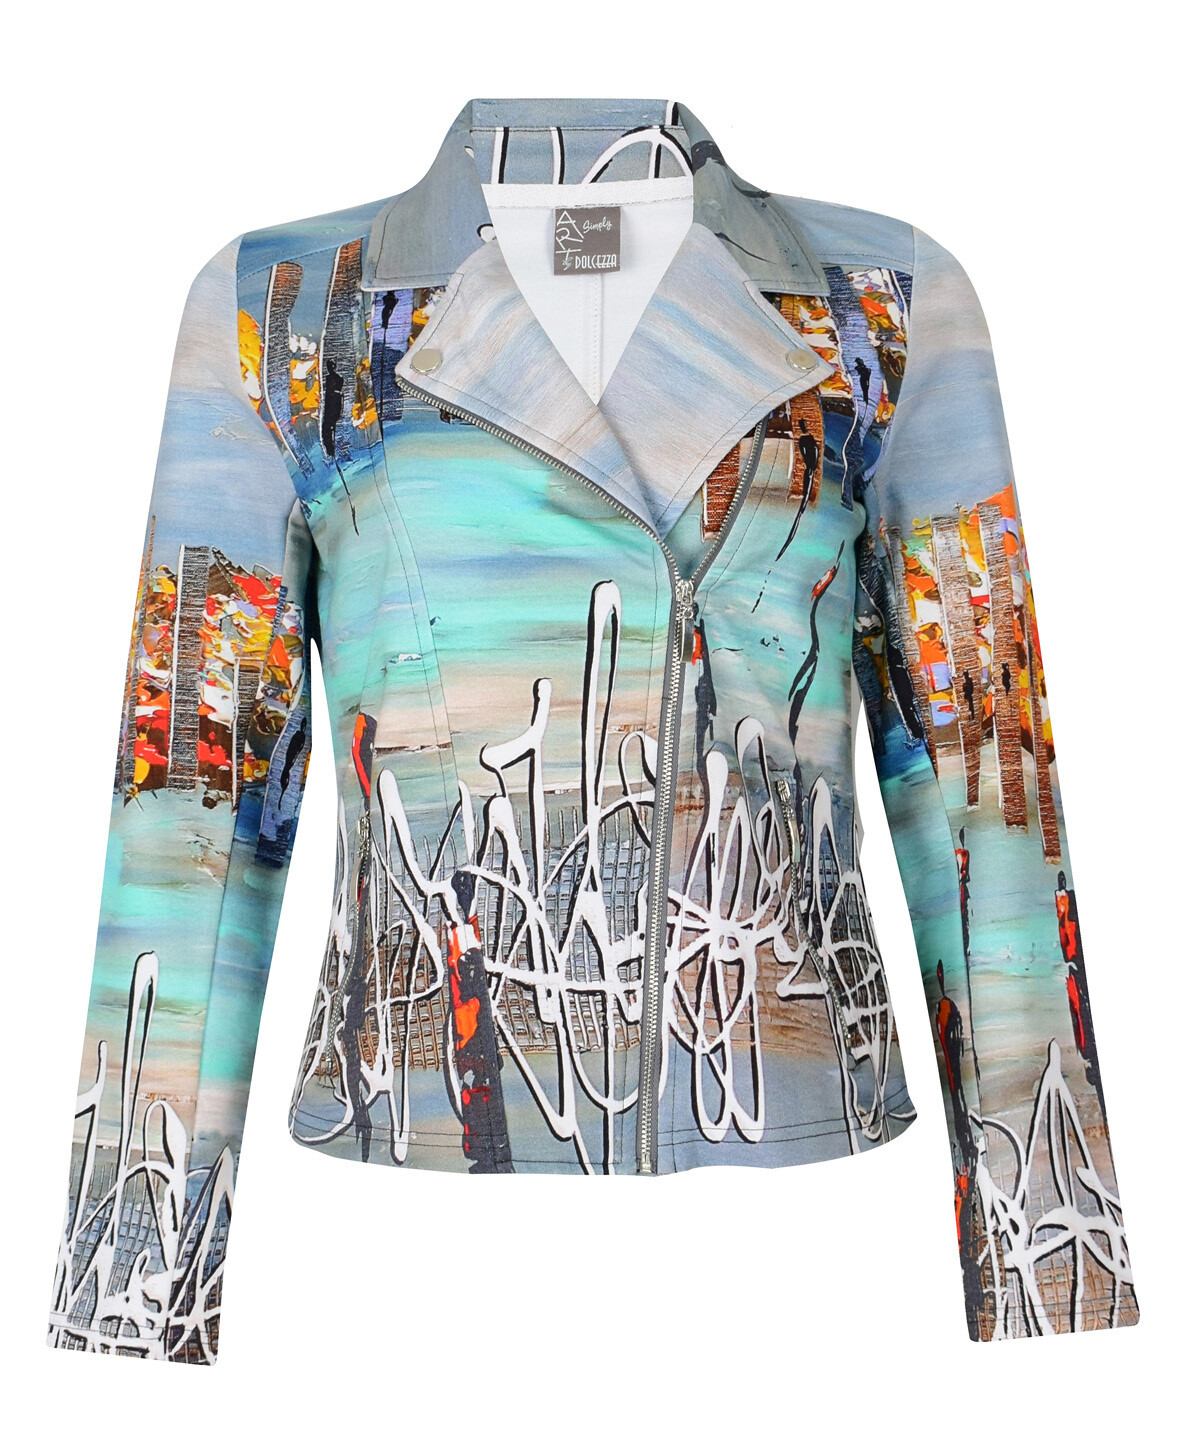 Simply Art Dolcezza: Indeed A Picture Perfect Beach Abstract Art Zip Moto Jacket SOLD OUT